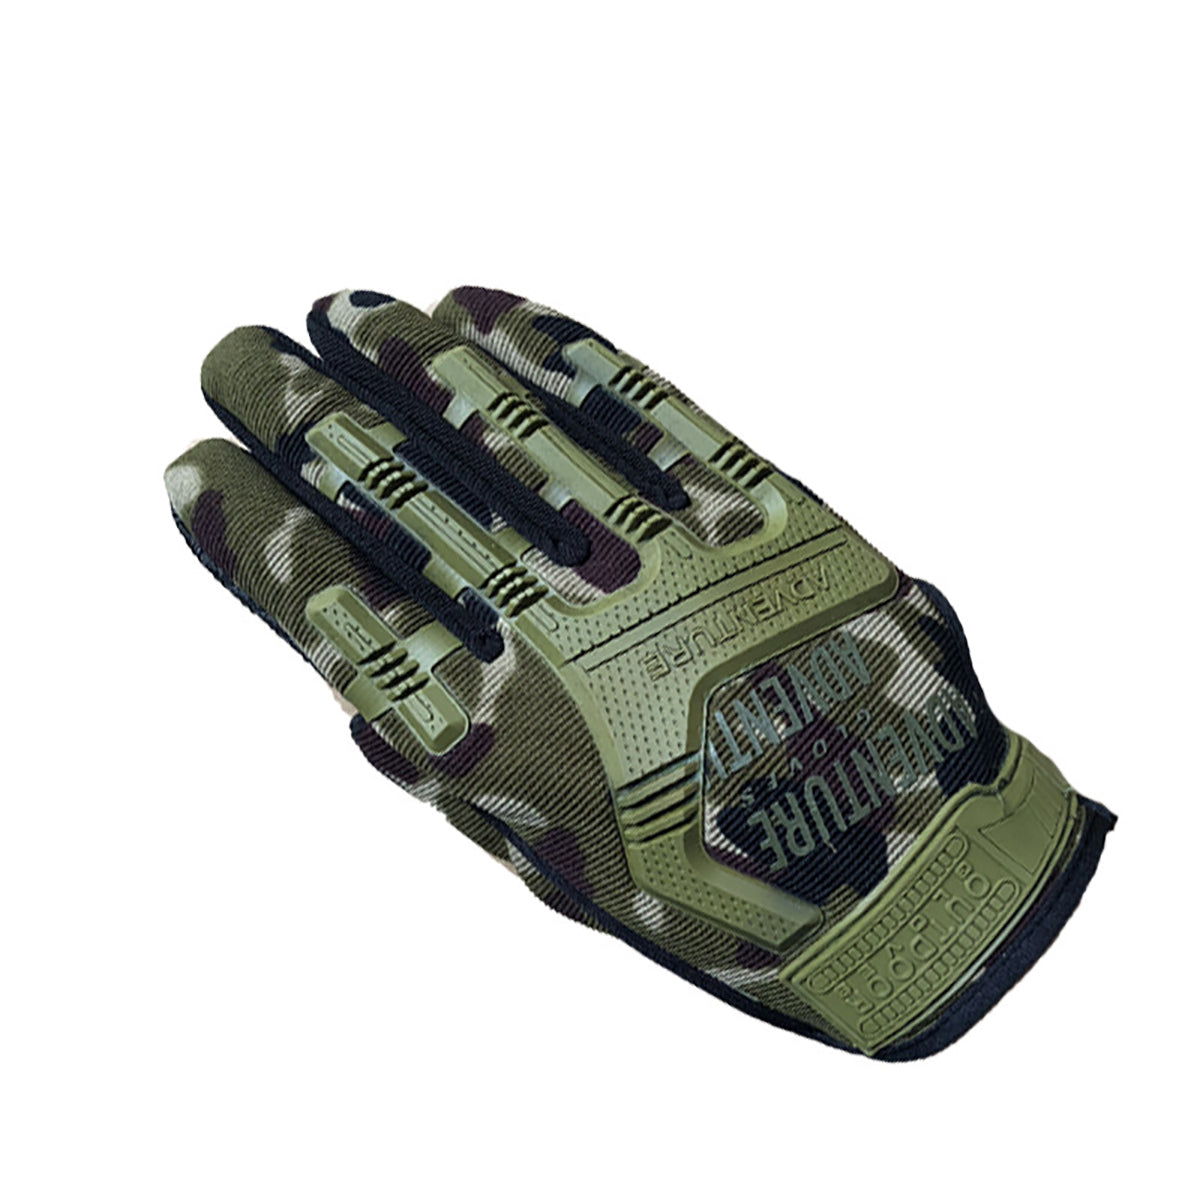 Dim Gray Motorcycle Full Finger Tactical Gloves Military Army Outdoor Hunting Cycling Sports